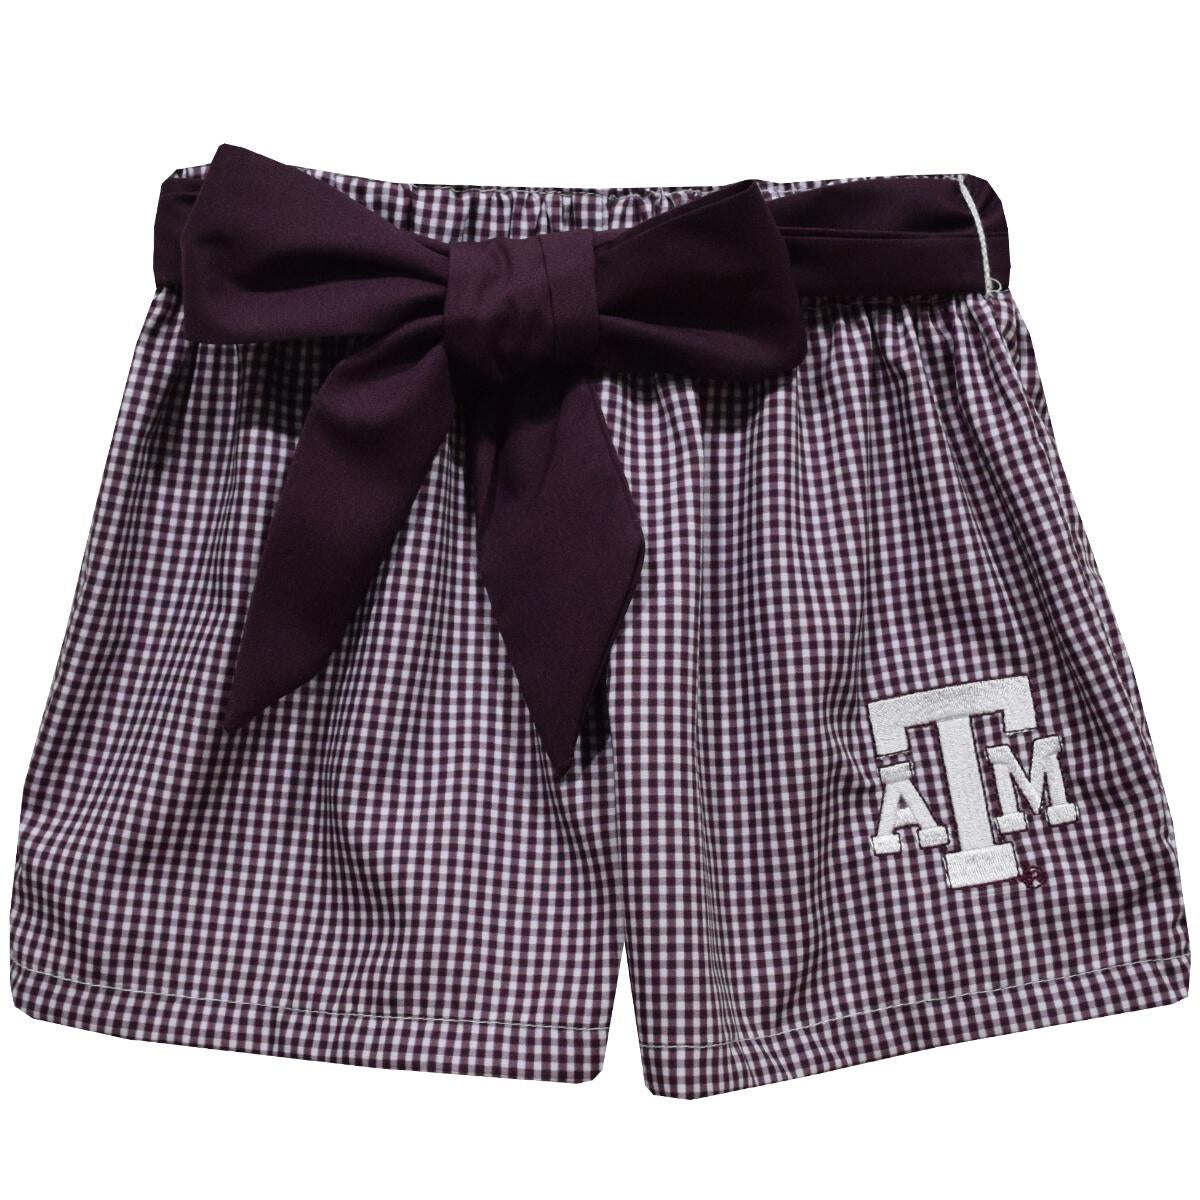 Texas A&M Aggies Embroidered Maroon Gingham Girls Short with Sash